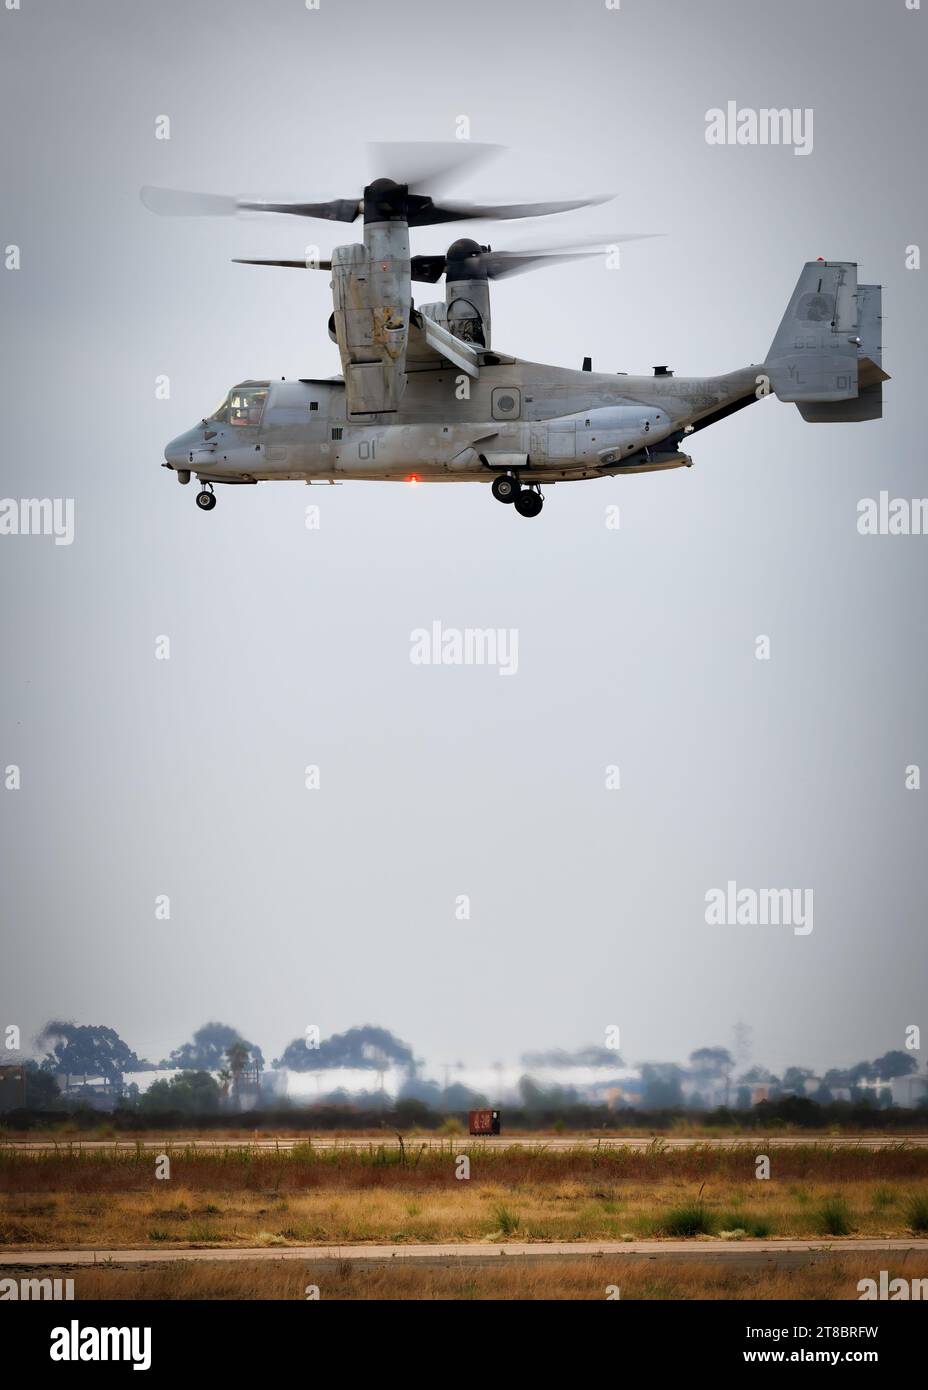 A V-22 Osprey hovers, on a cloudy day, at America's Airshow 2023 in Miramar, California. Stock Photo